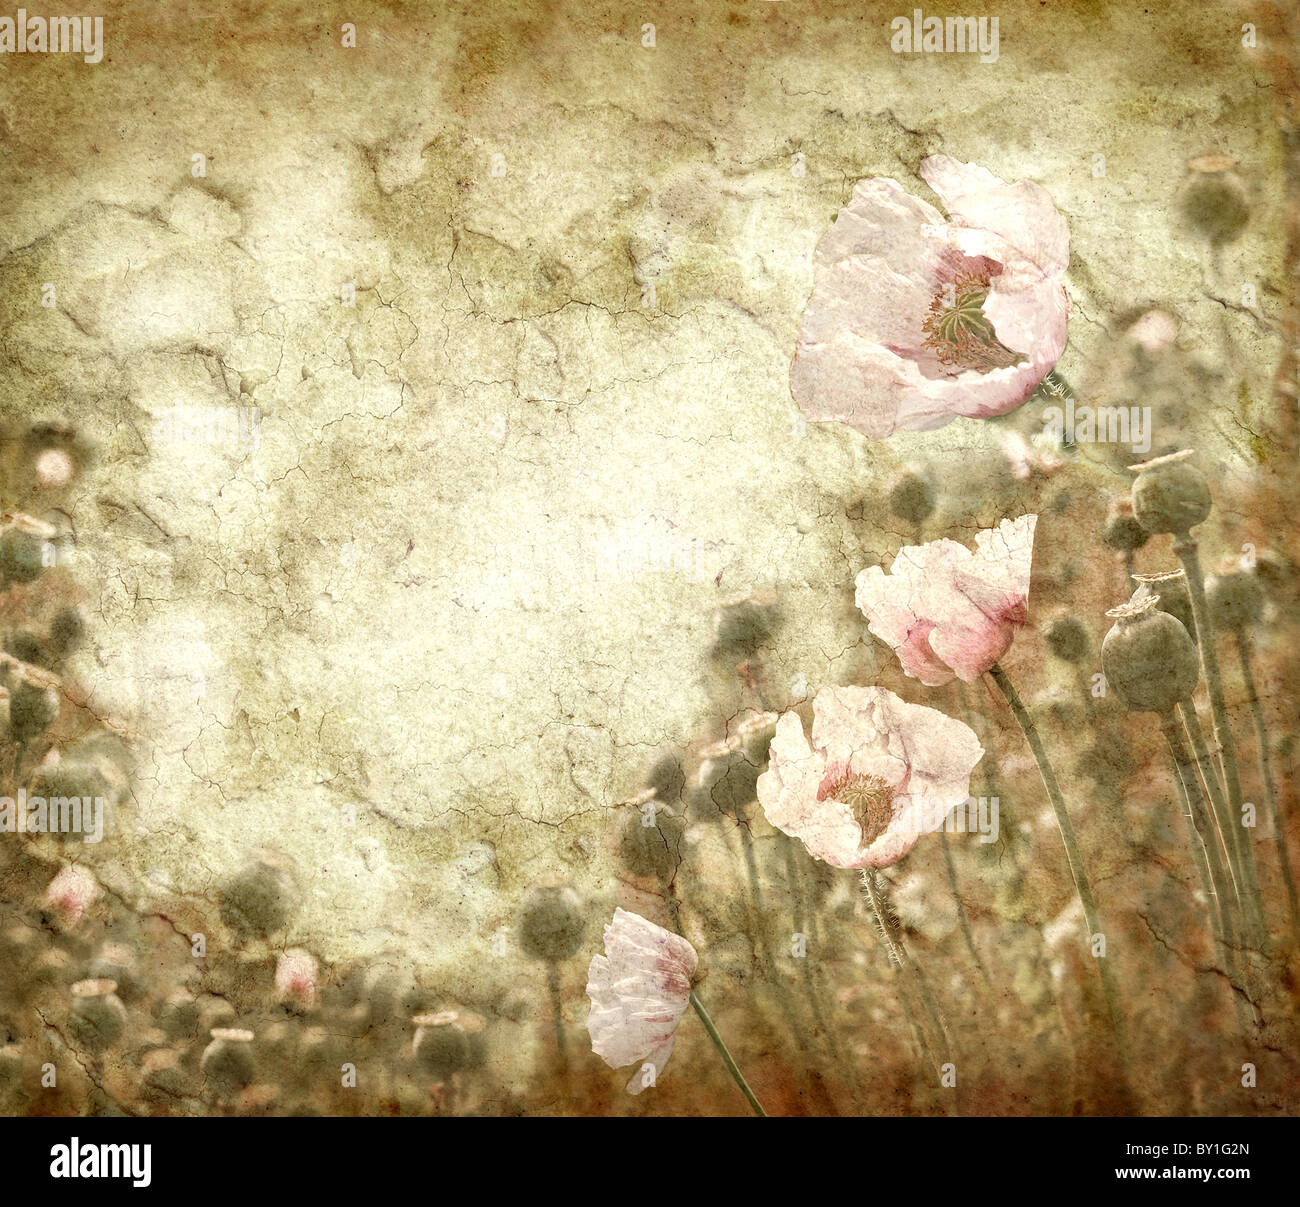 Grungy background with poppies Stock Photo